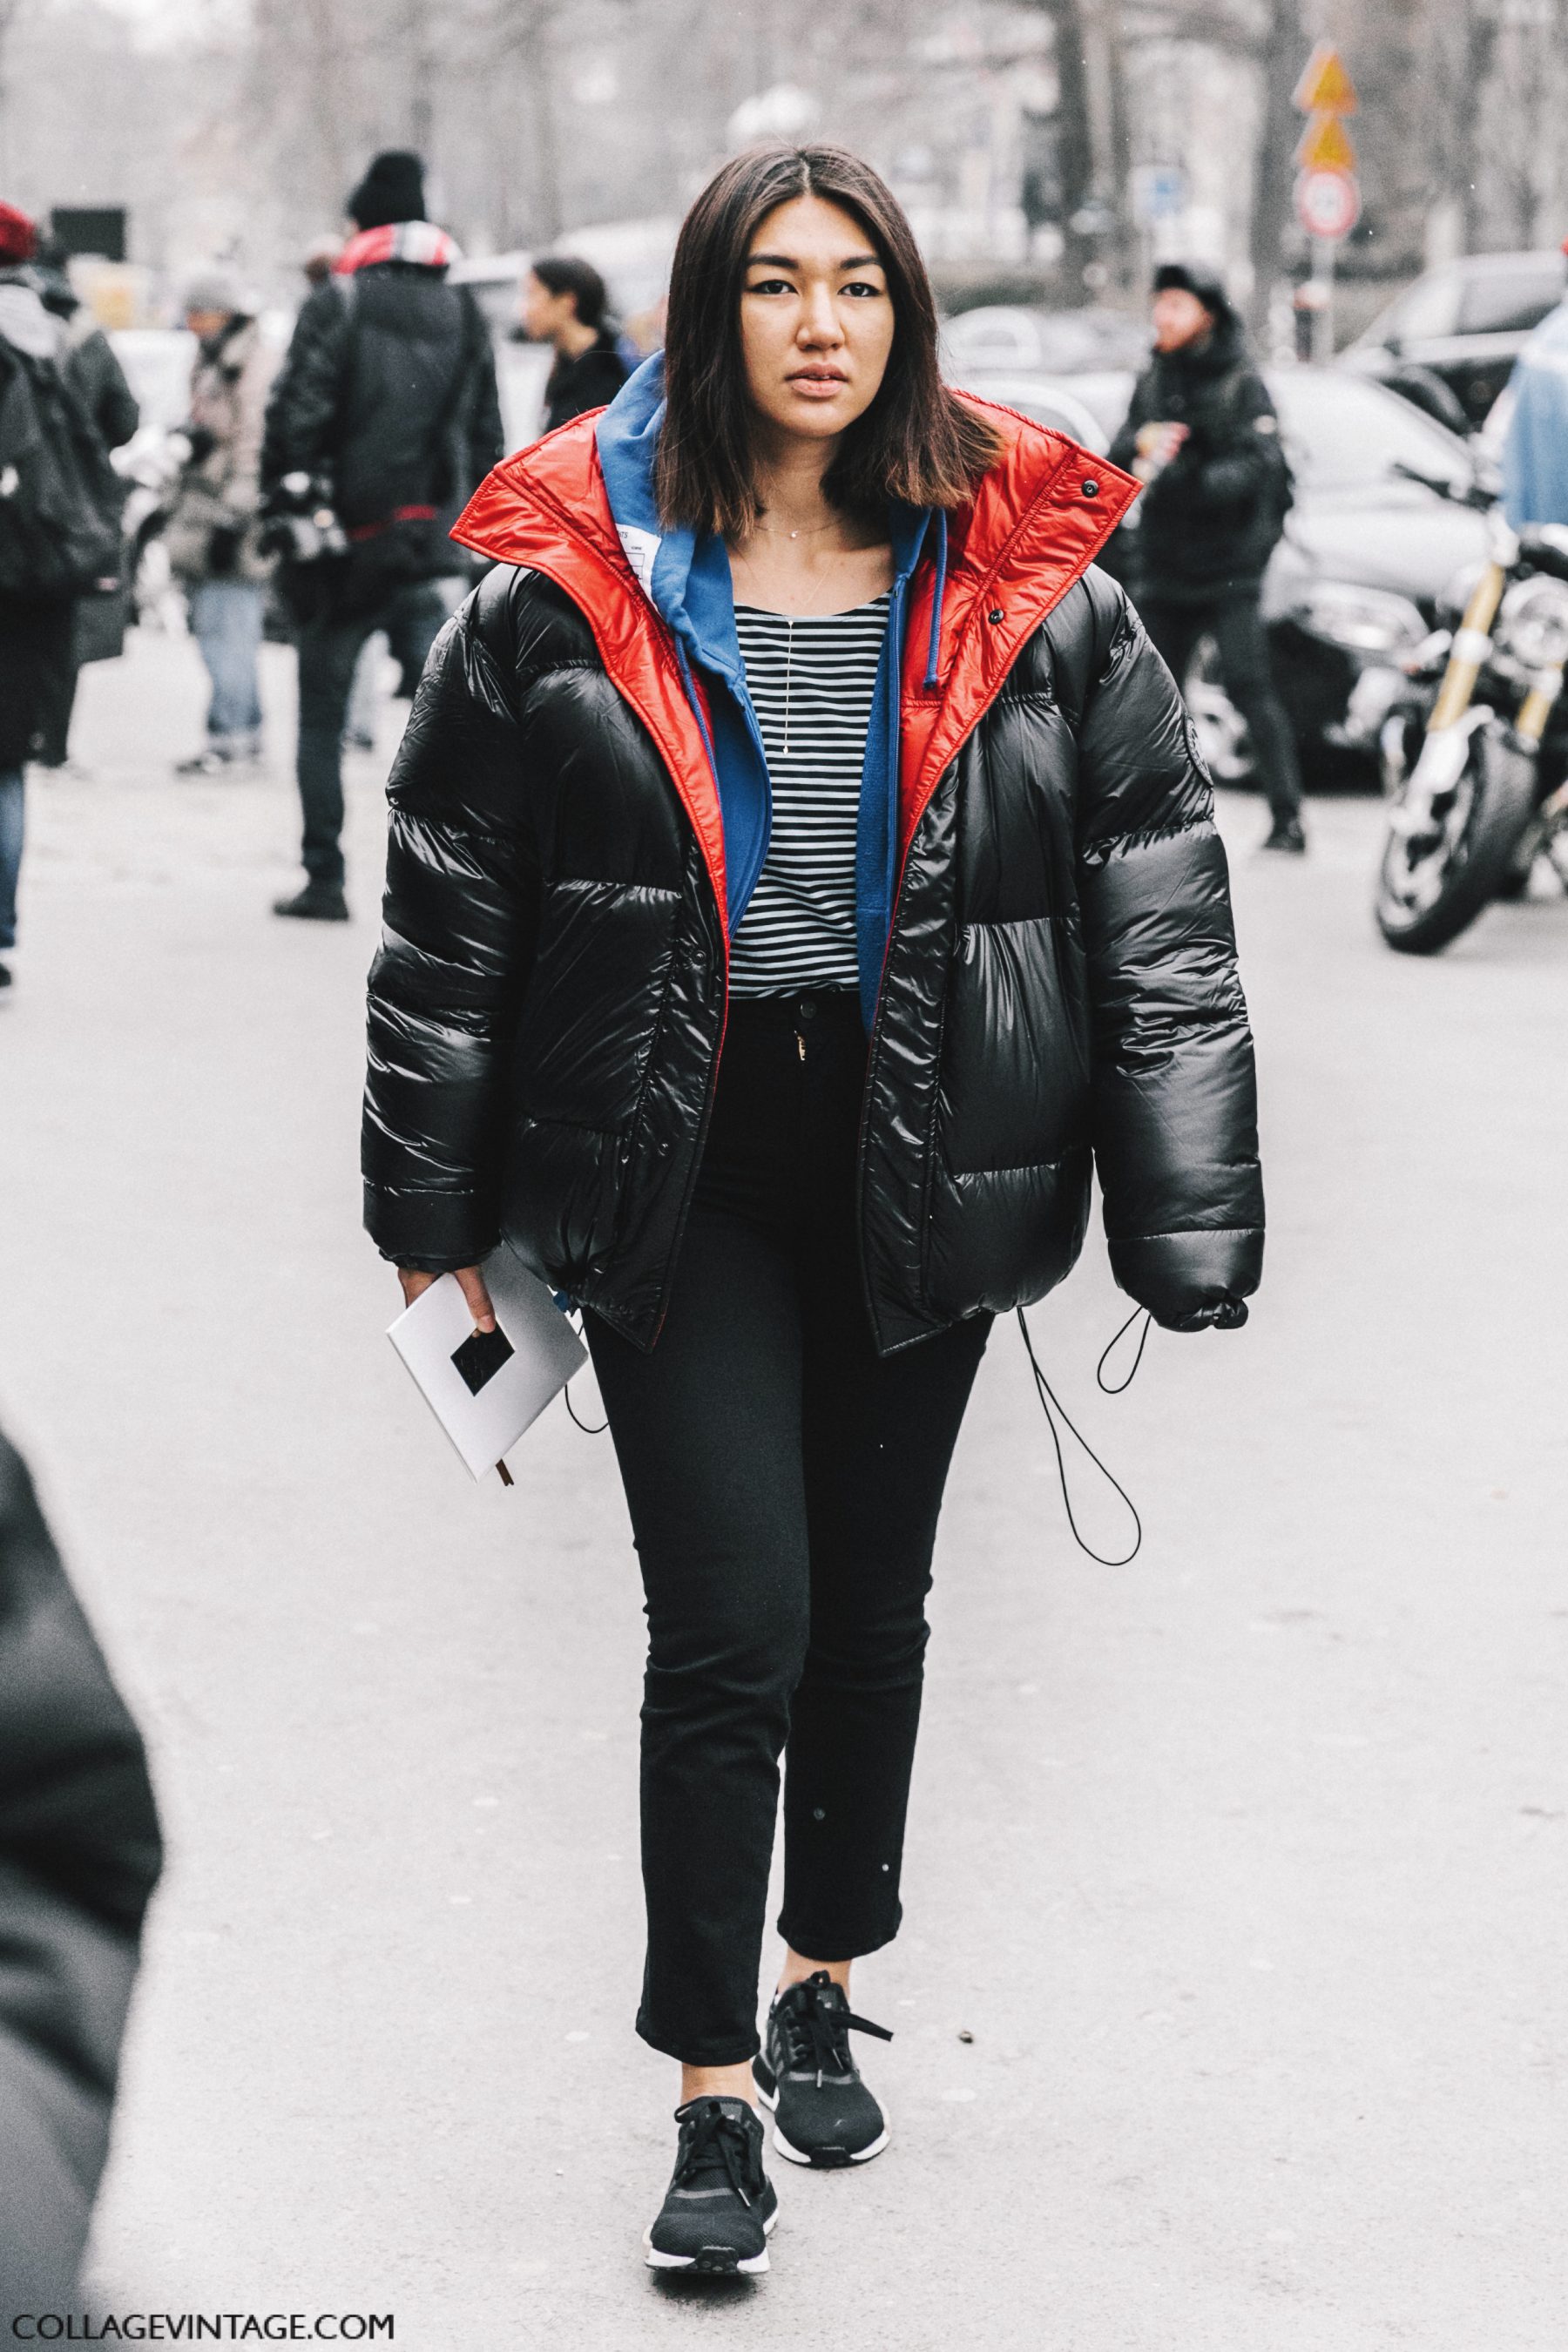 Couture_Paris_Fashion_Week-PFW-Street_Style-Chanel-Vetements-Outfit-Collage_Vintage-49-1800x2700